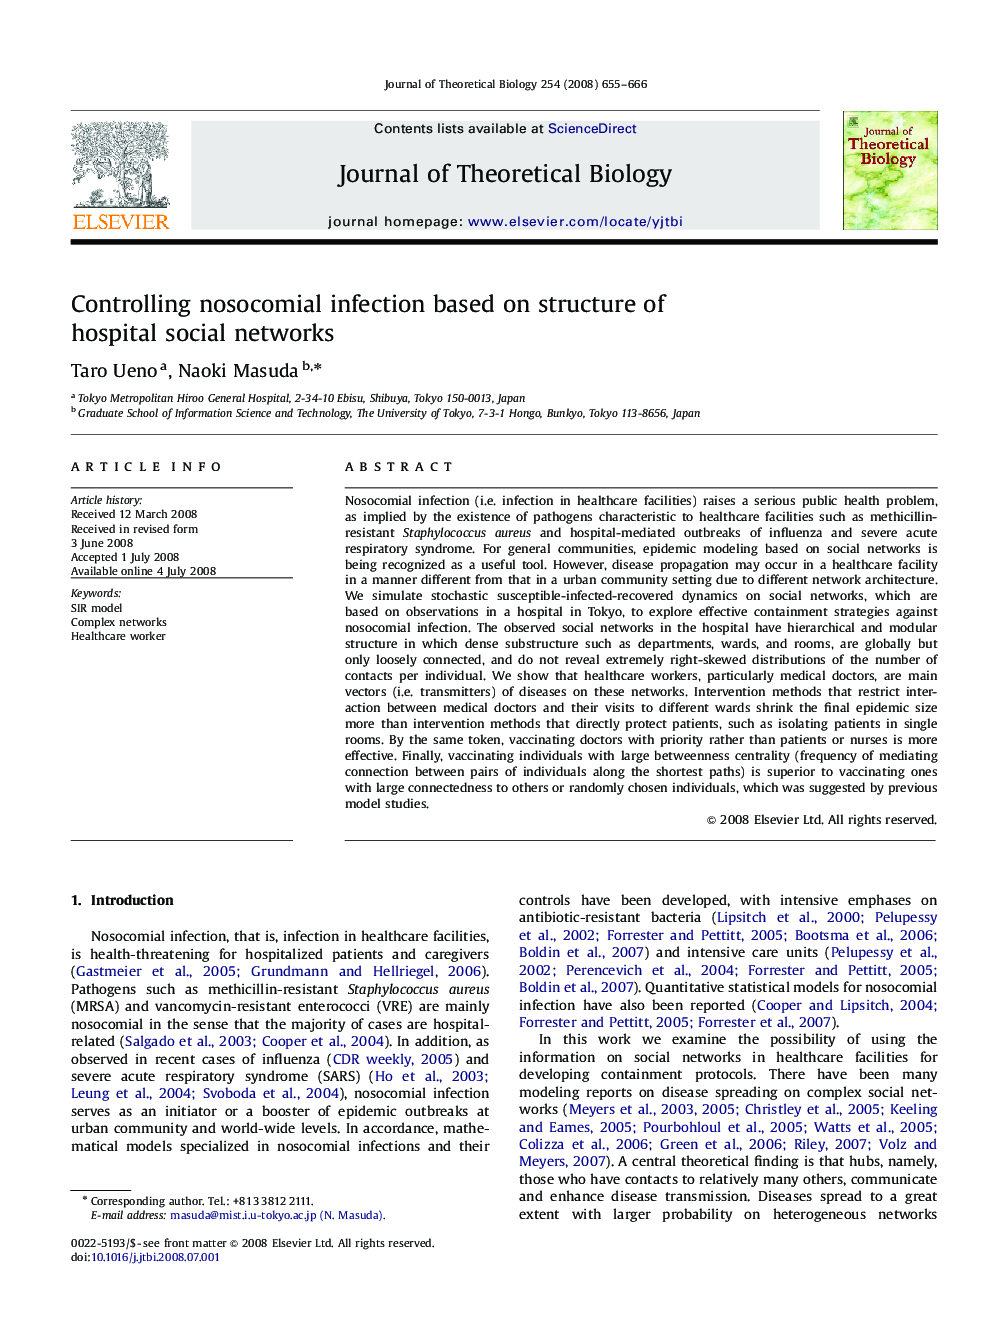 Controlling nosocomial infection based on structure of hospital social networks